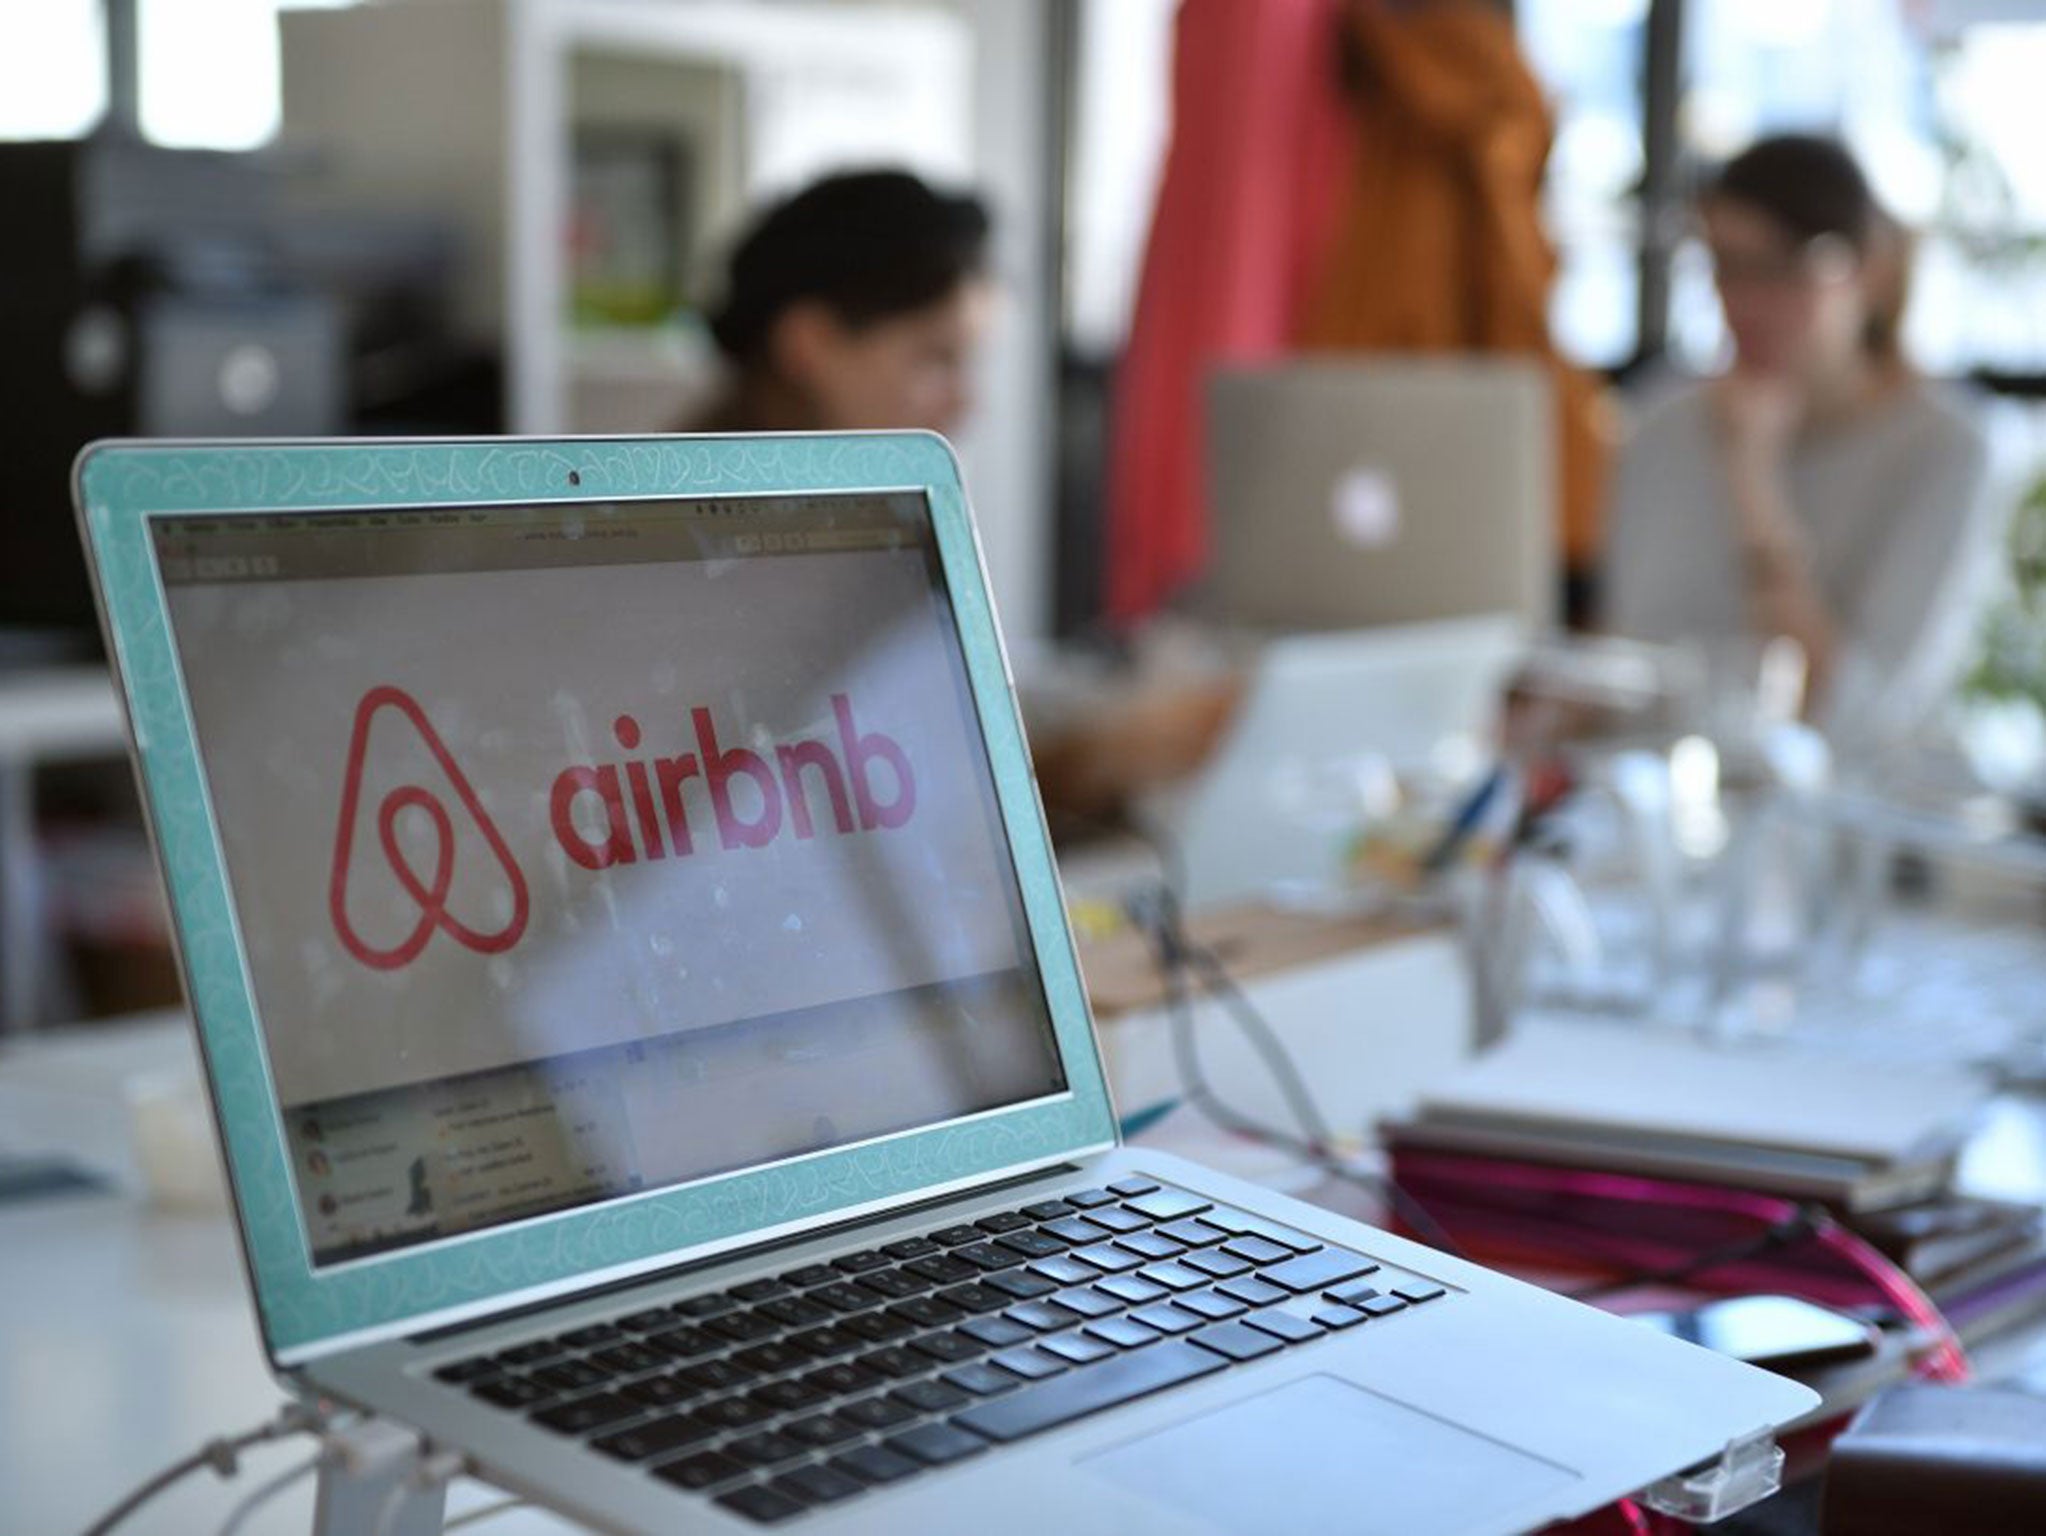 San Francisco voters rejected Proposition F, which would place new limits on Airbnb short-term rentals